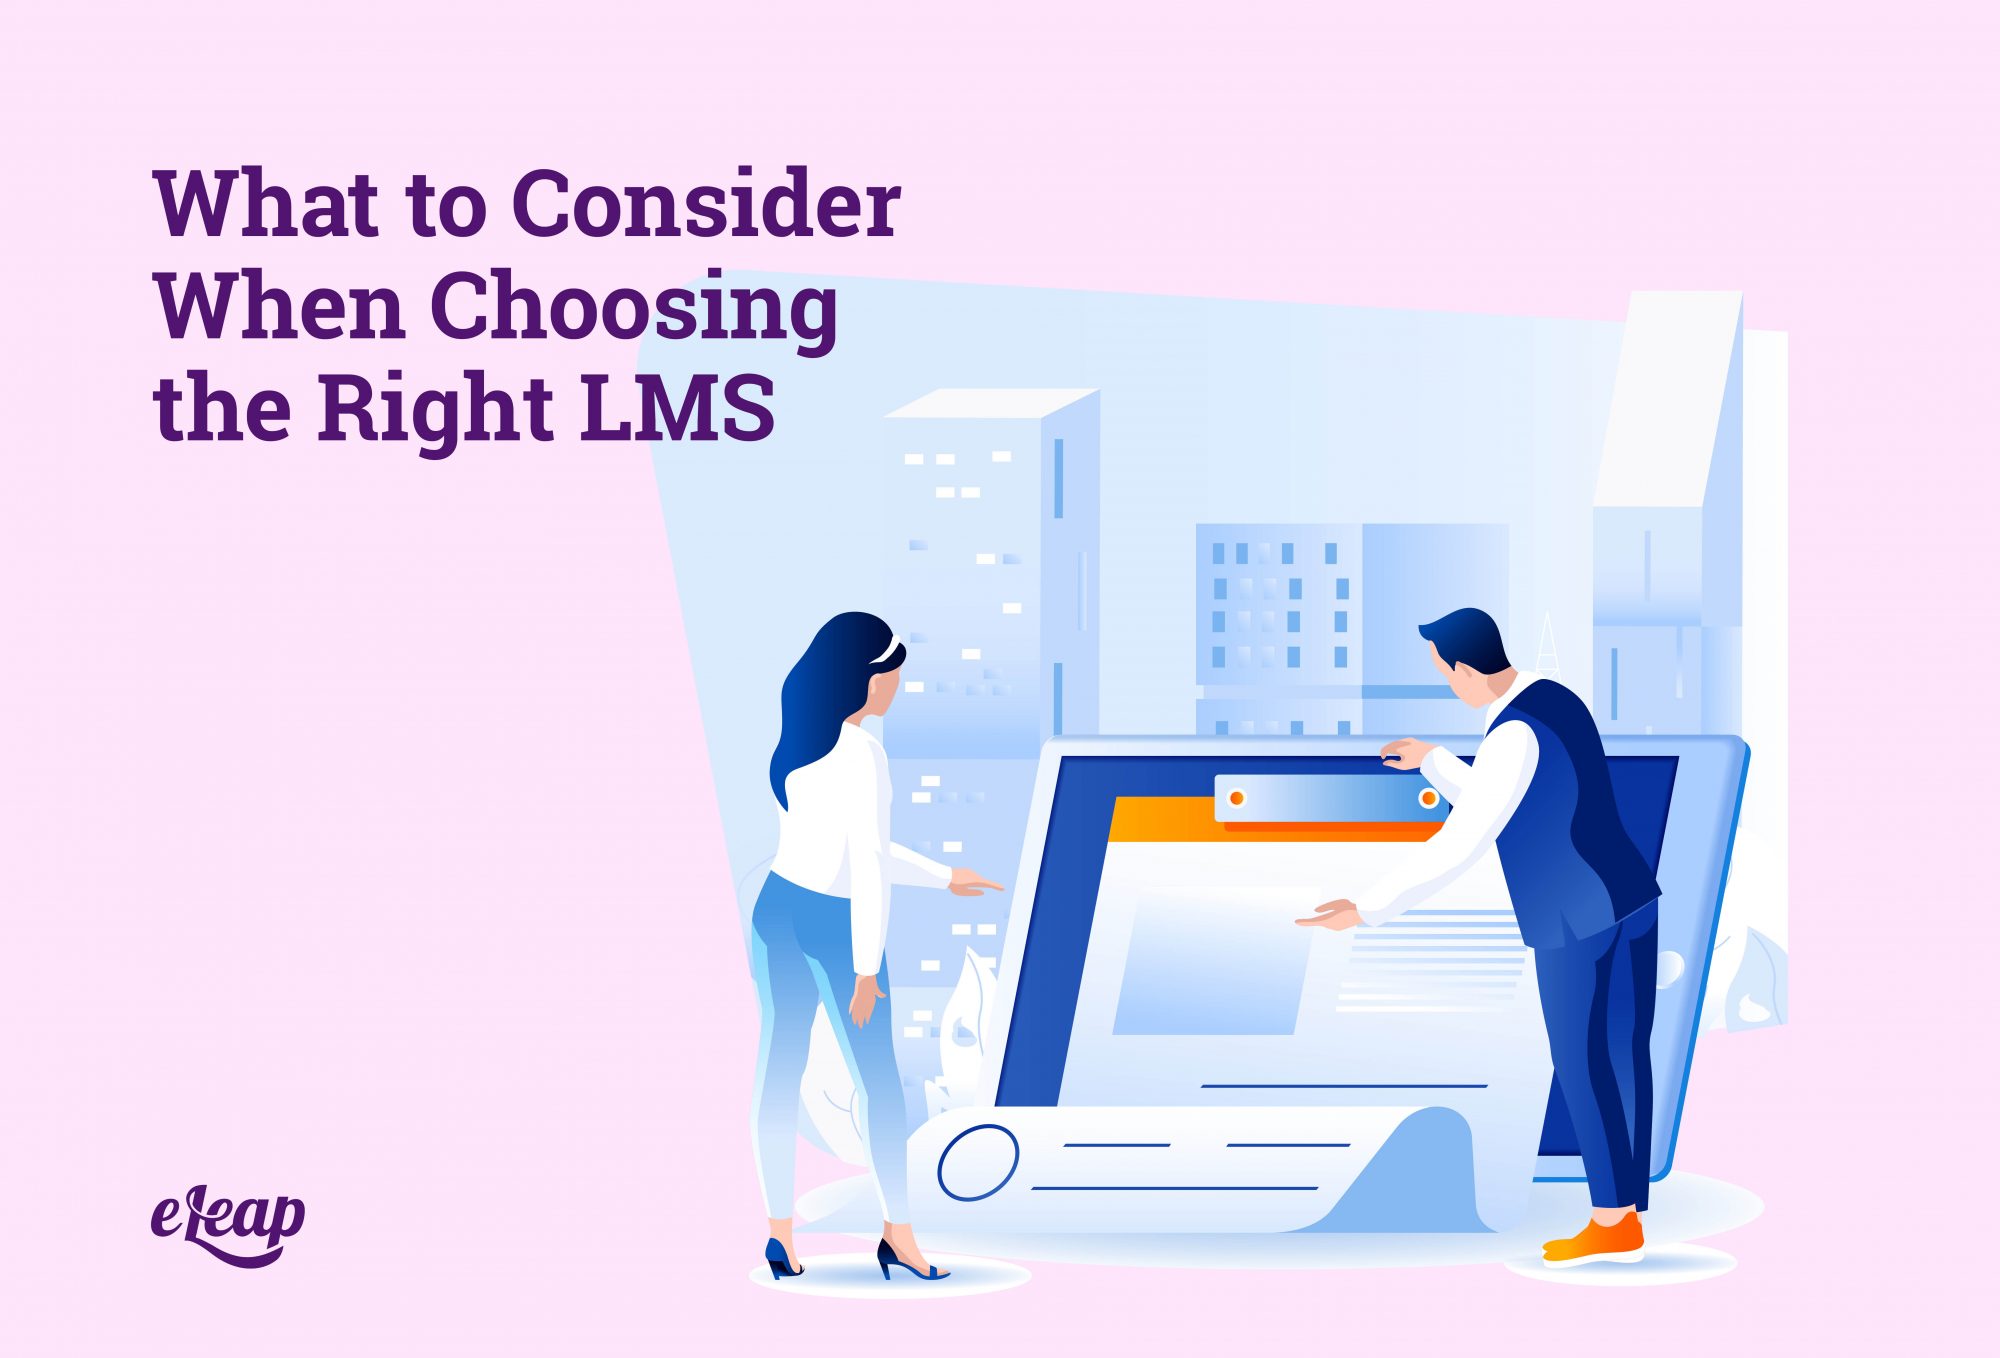 What to Consider When Choosing the Right LMS